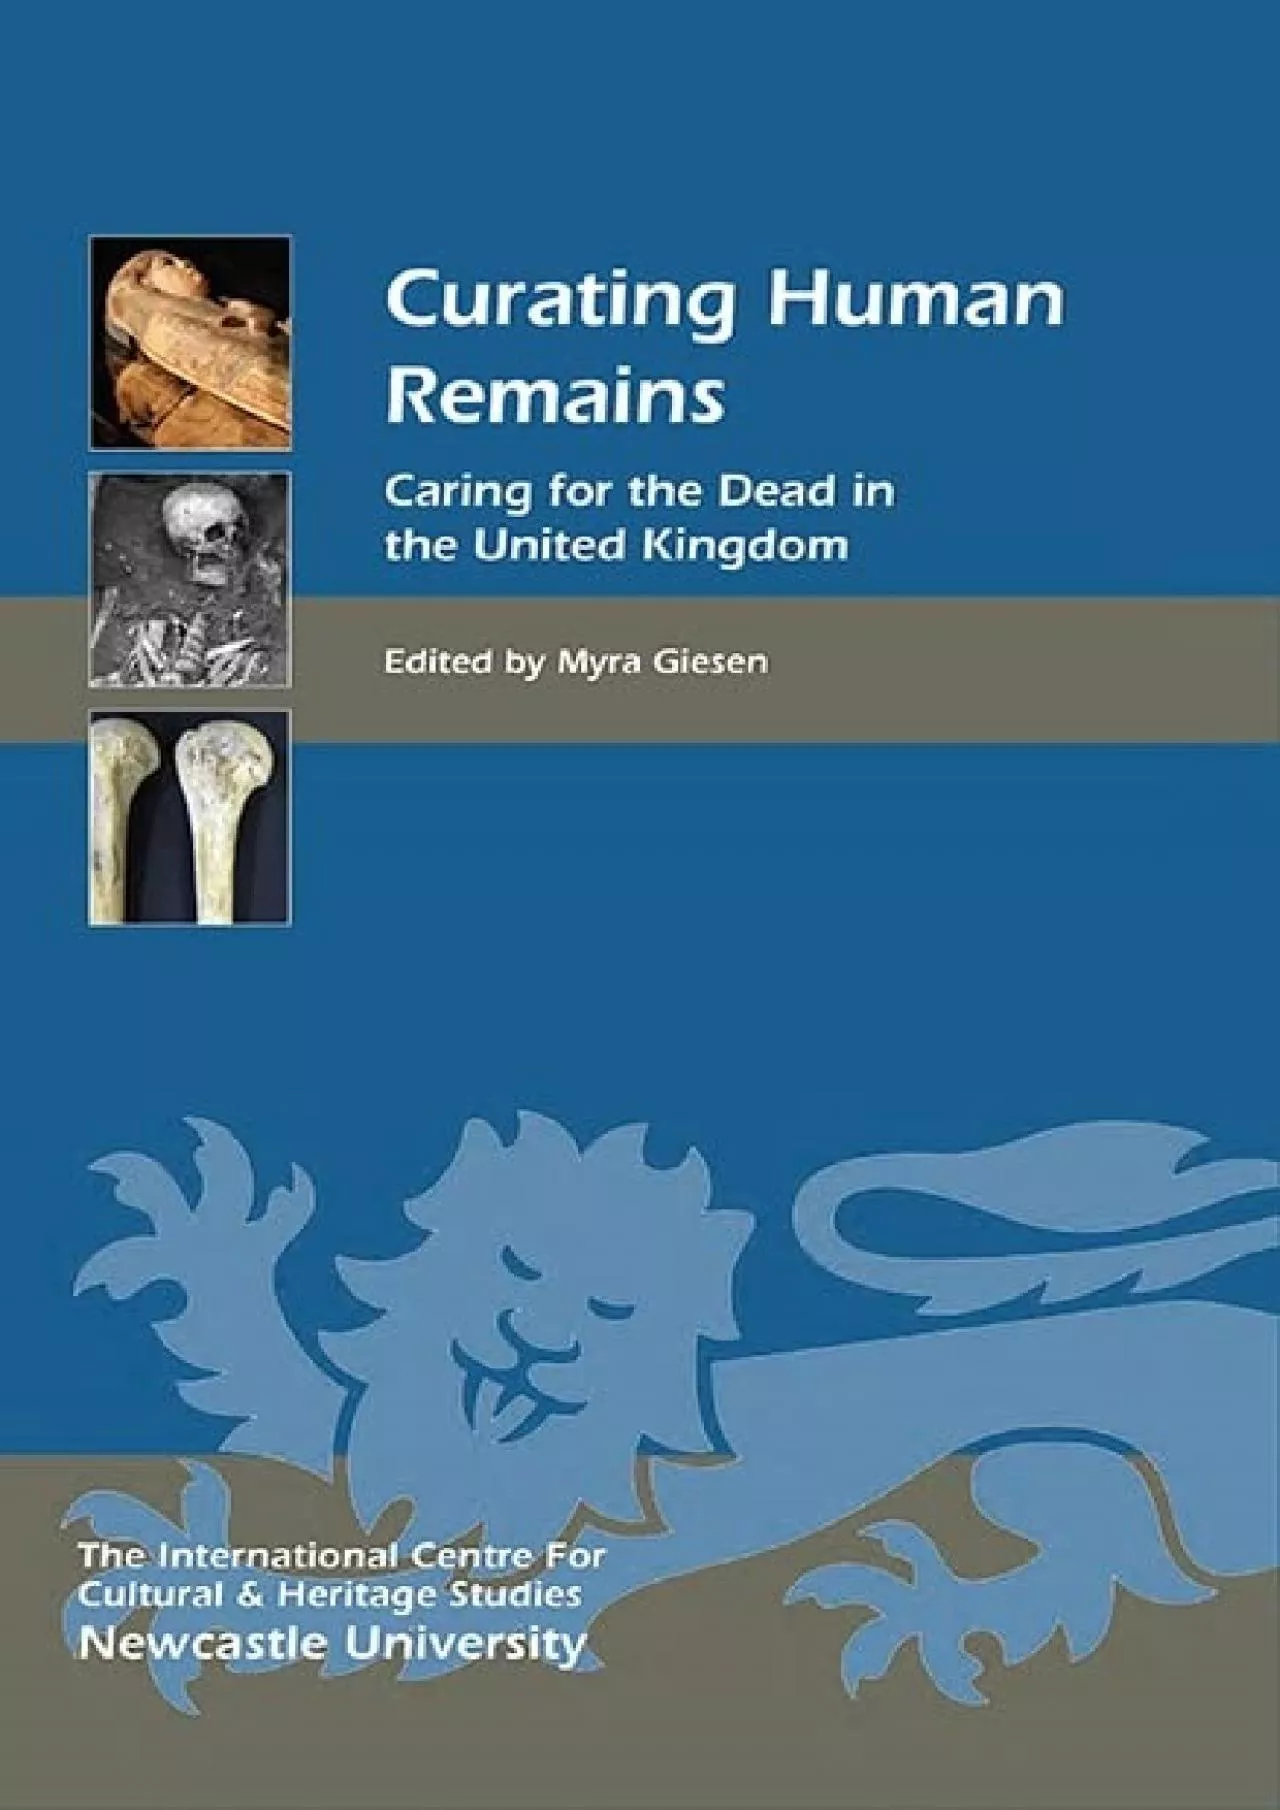 (DOWNLOAD)-Curating Human Remains: Caring for the Dead in the United Kingdom (Heritage